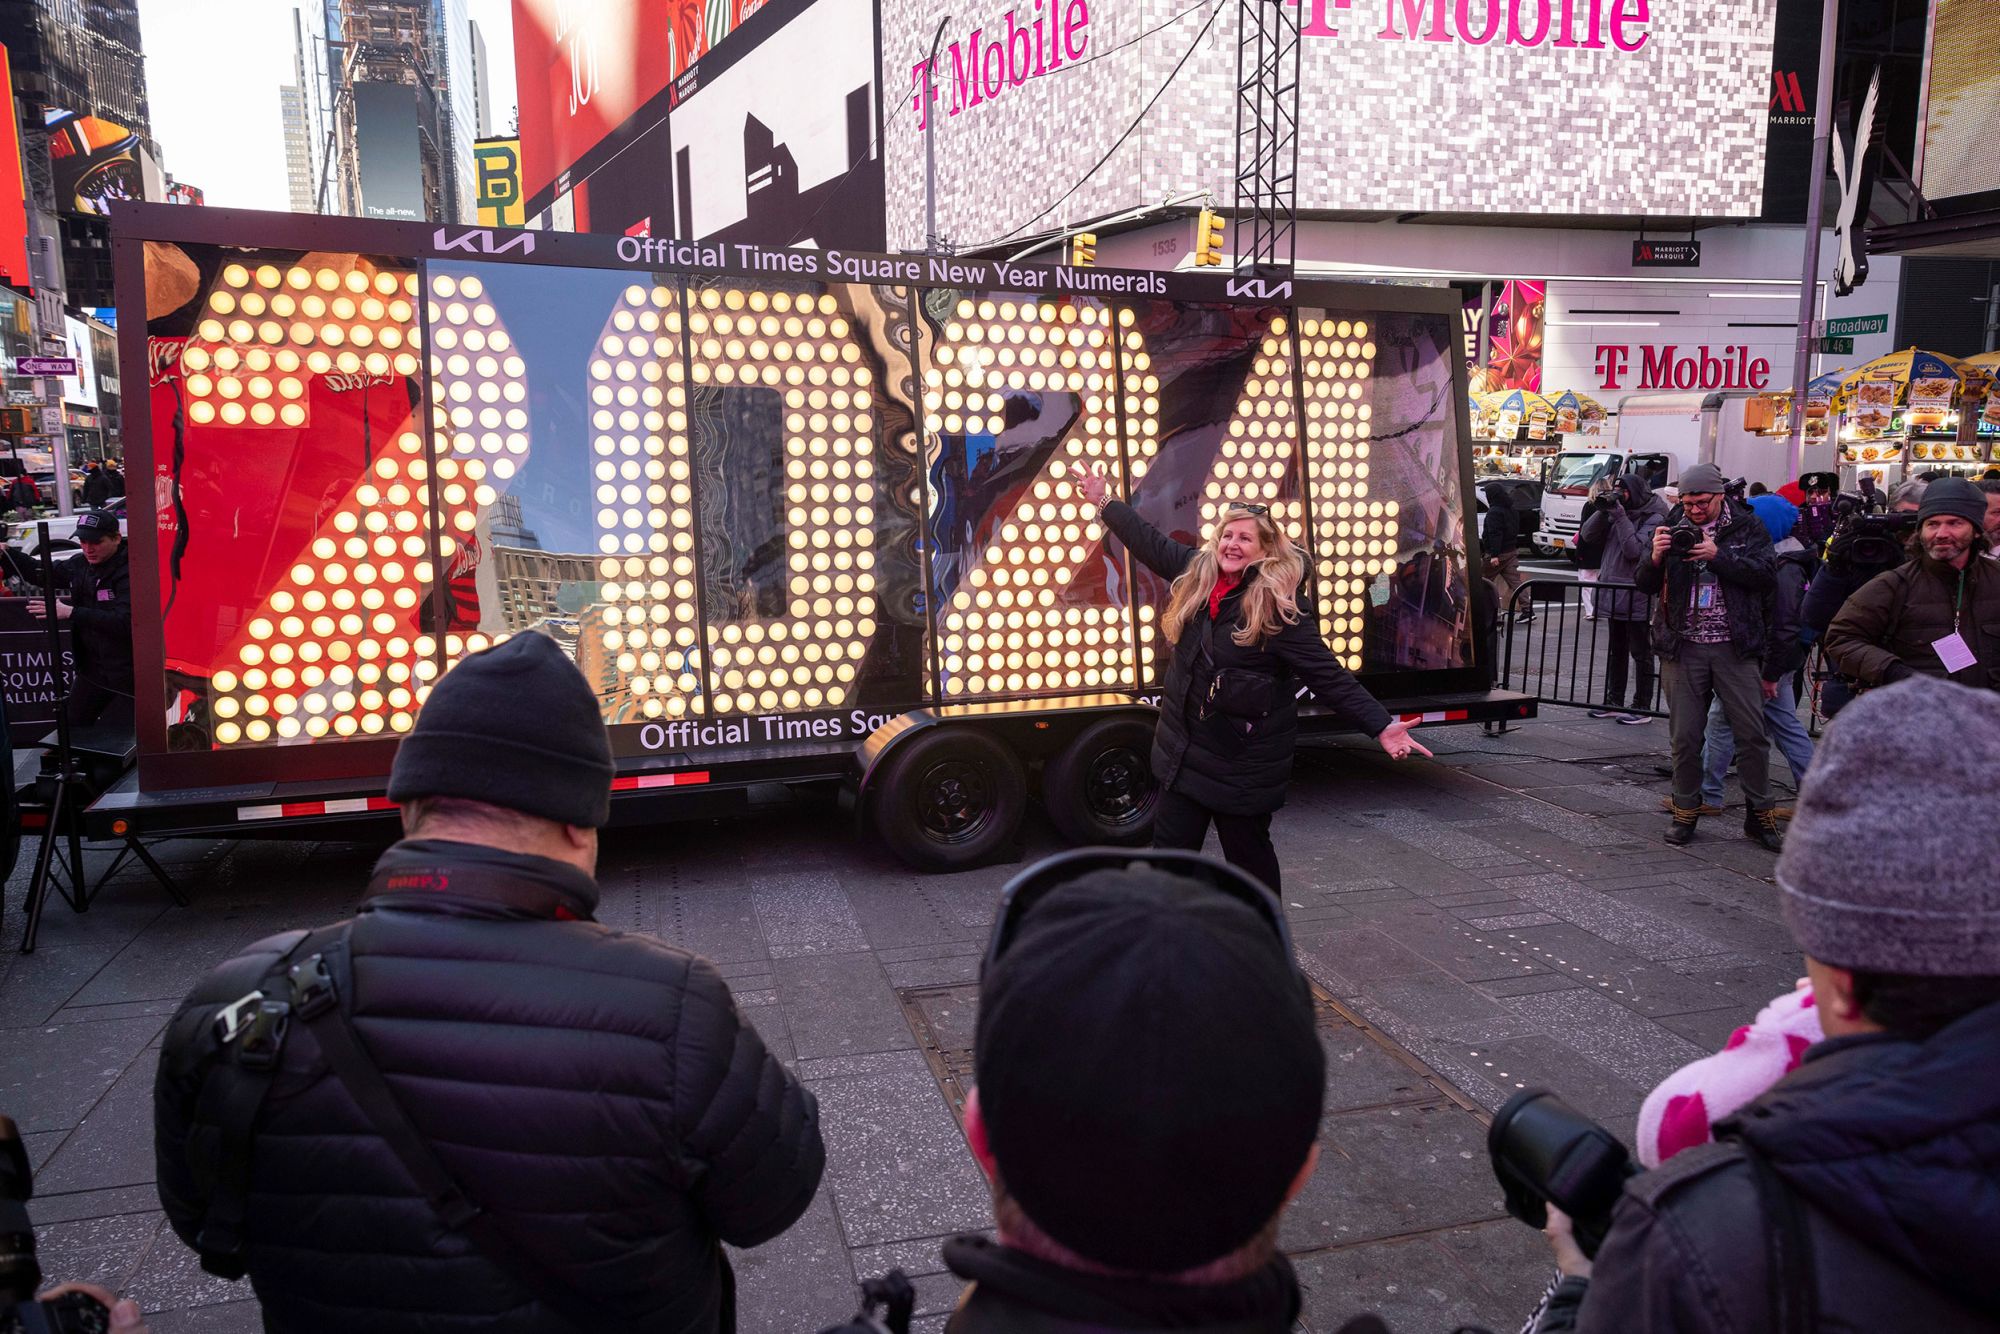 People pose in front of the 2024 New Year's Eve numerals are displayed in Times Square, Wednesday, Dec. 20, 2023, in New York. (AP Photo/Yuki Iwamura)